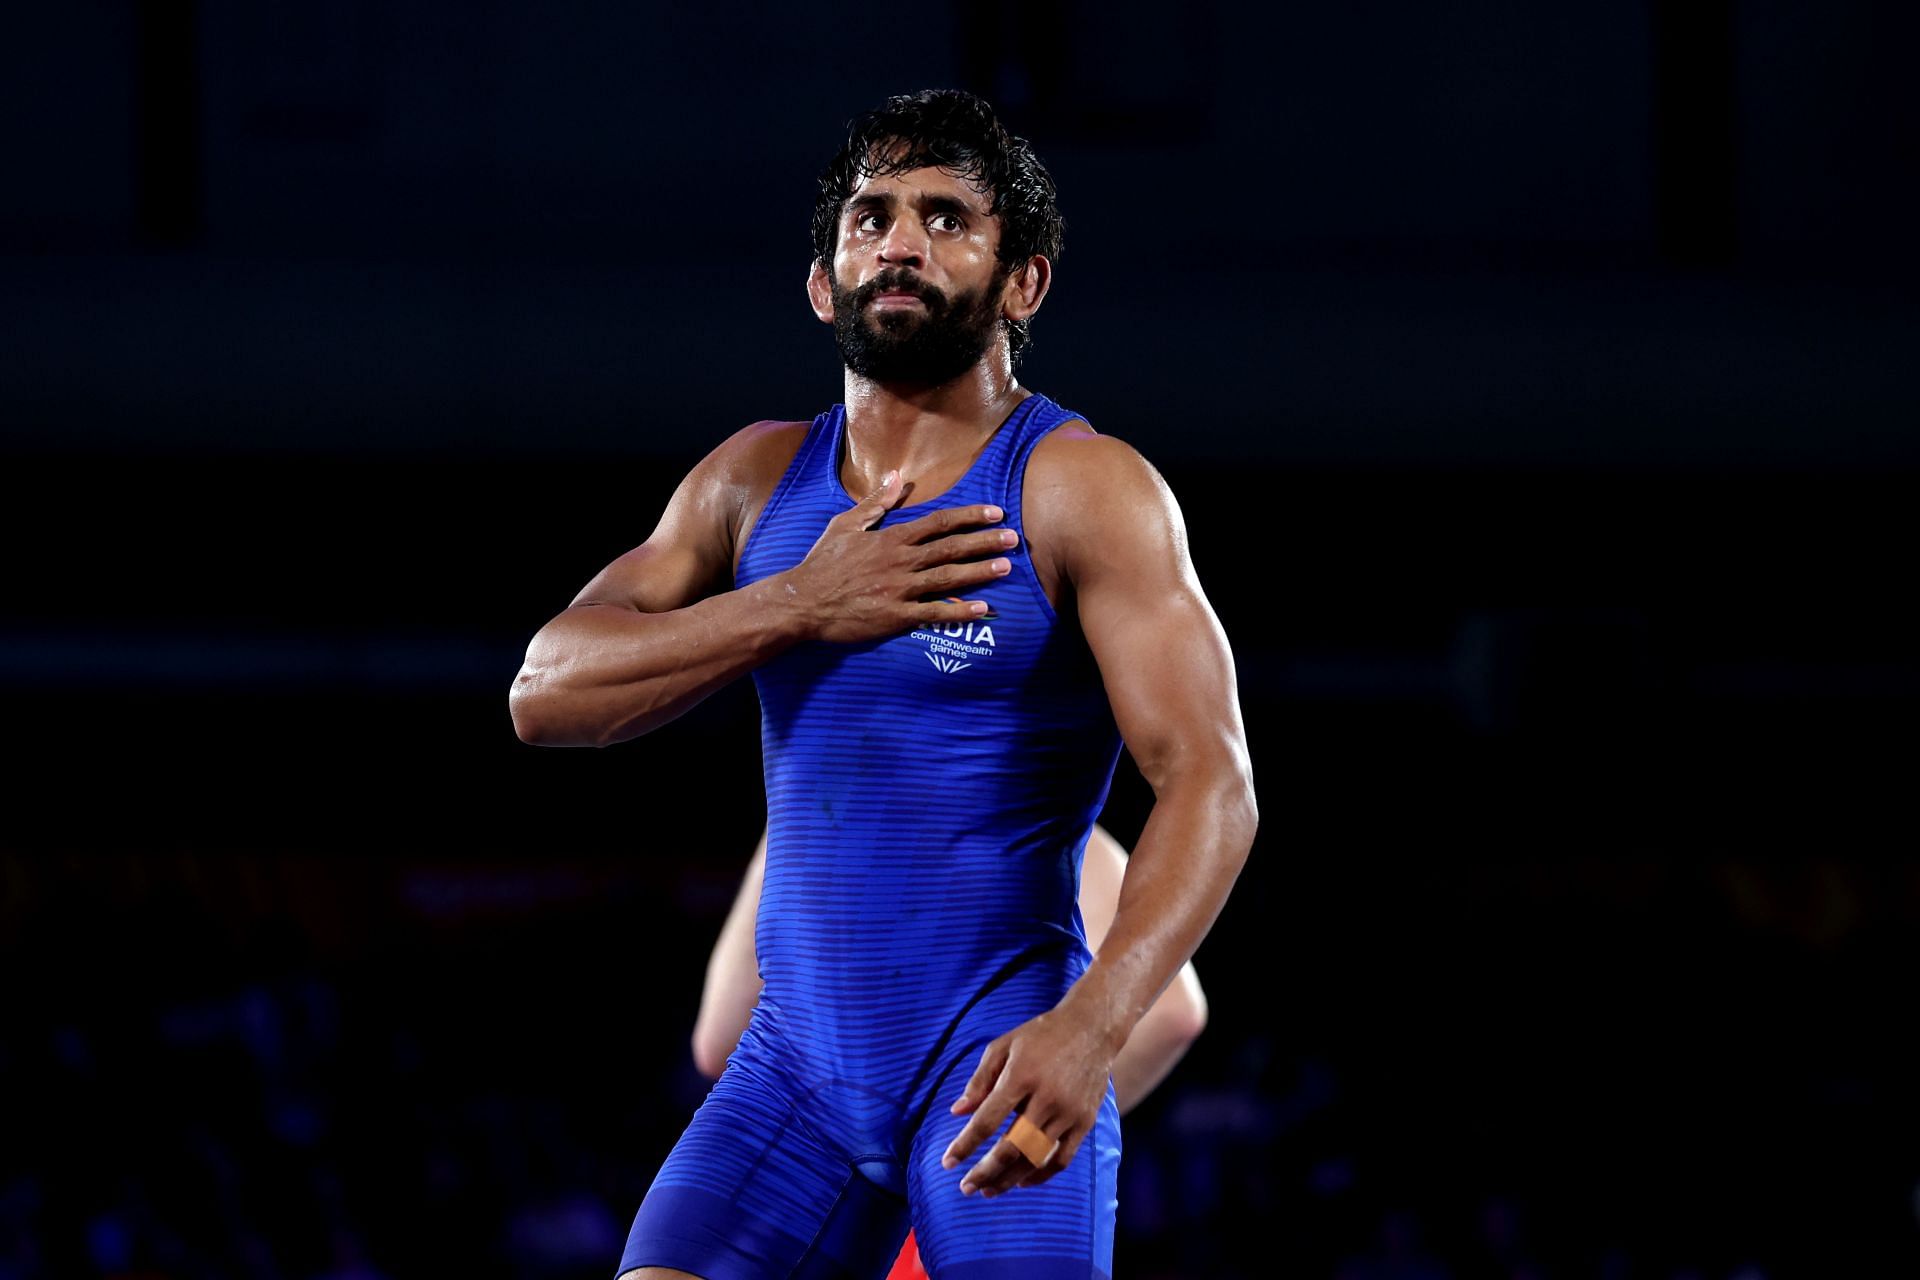 Wrestling - Commonwealth Games: Day 8